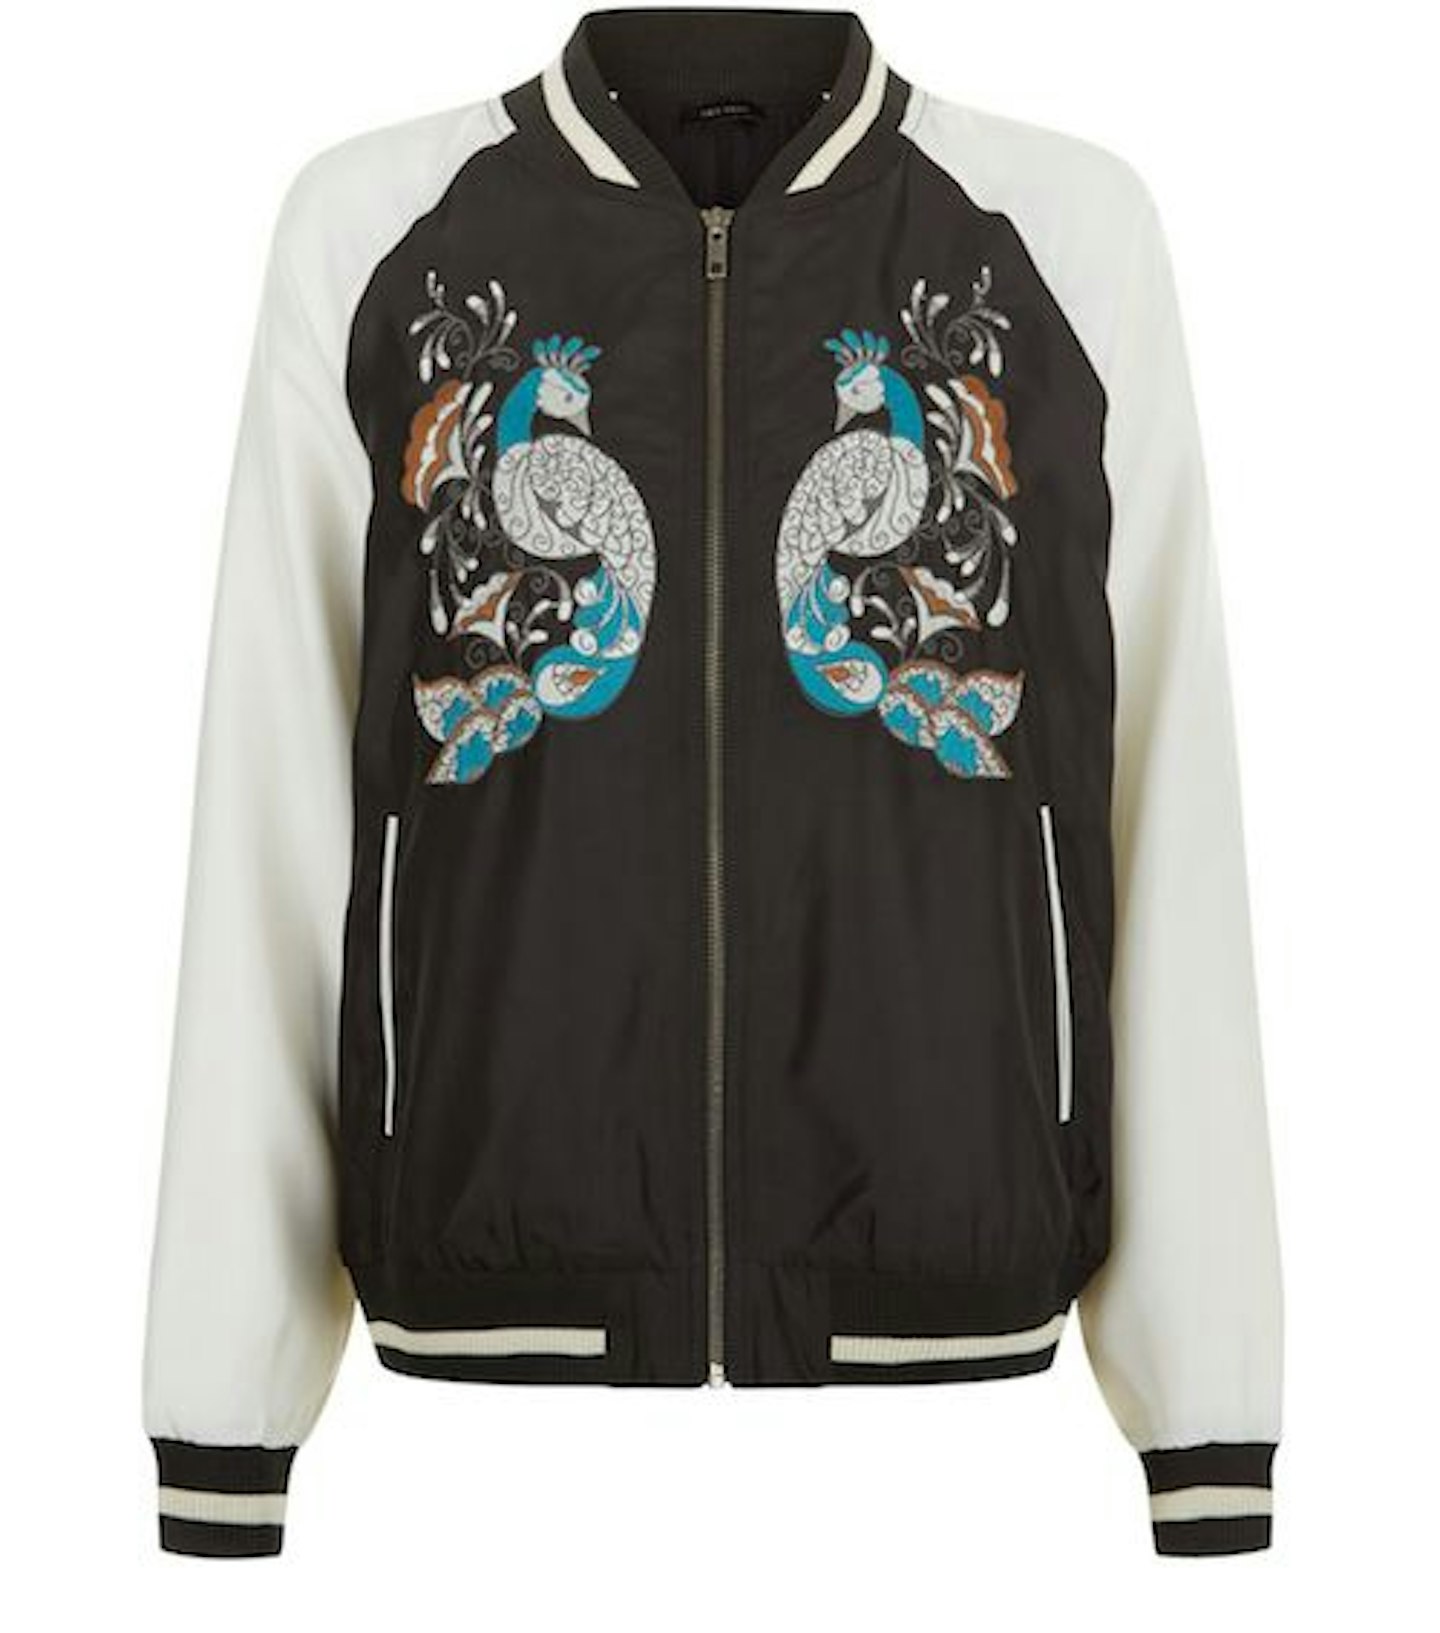 New Look Embroidered Bomber 34.99